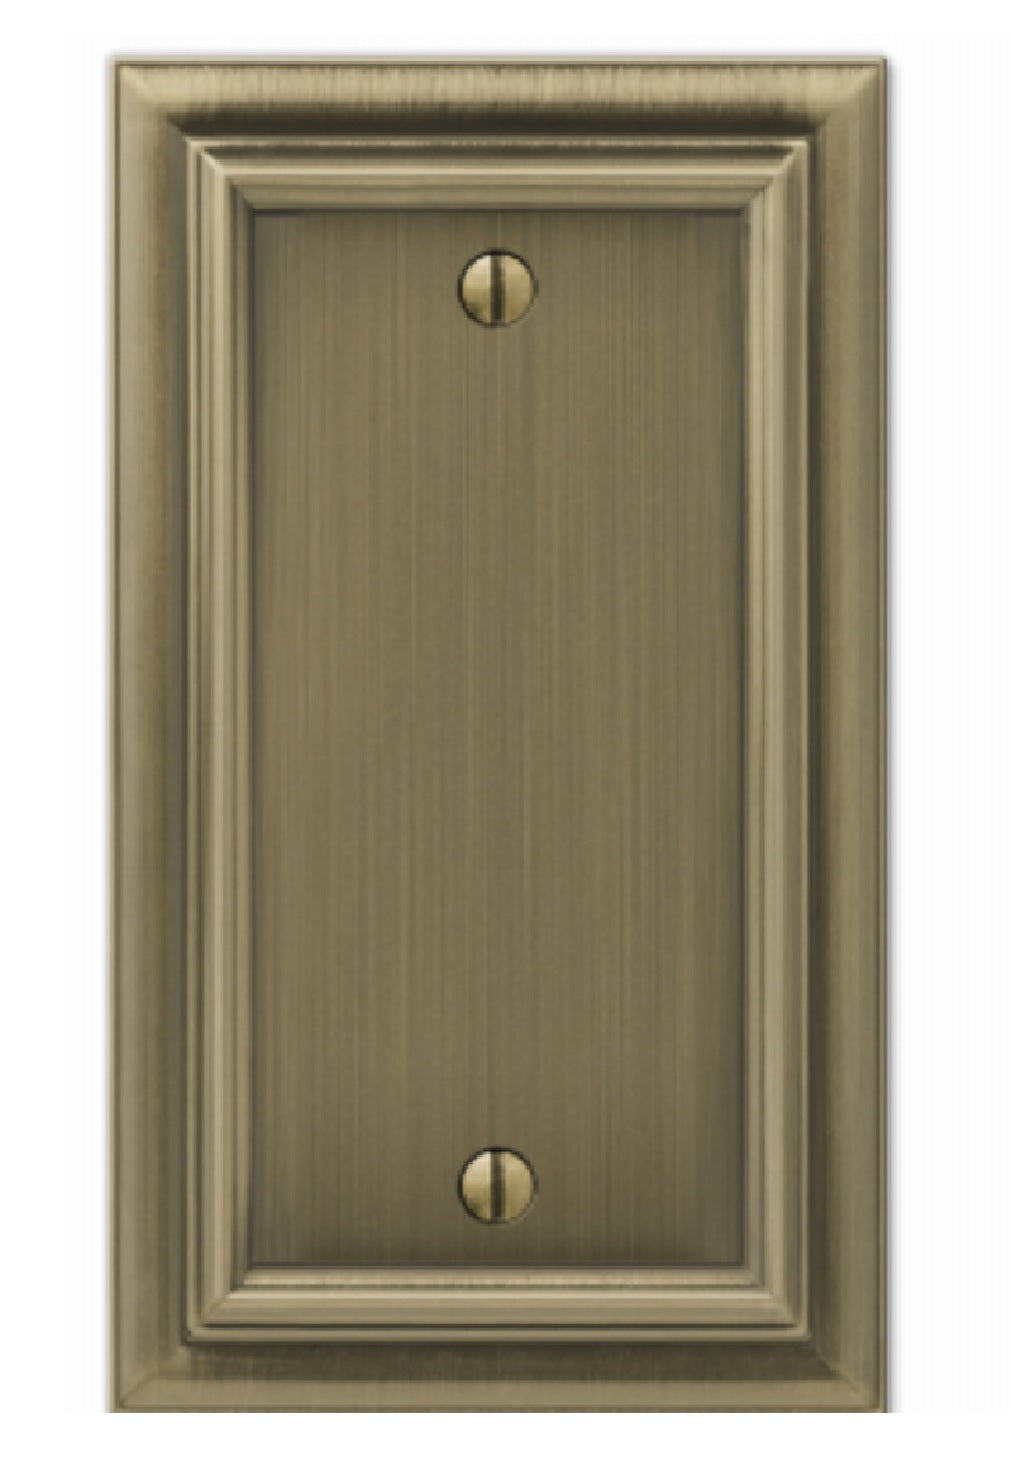 Amerelle 94BBB 1 Blank Wall Plate, Brushed Brass